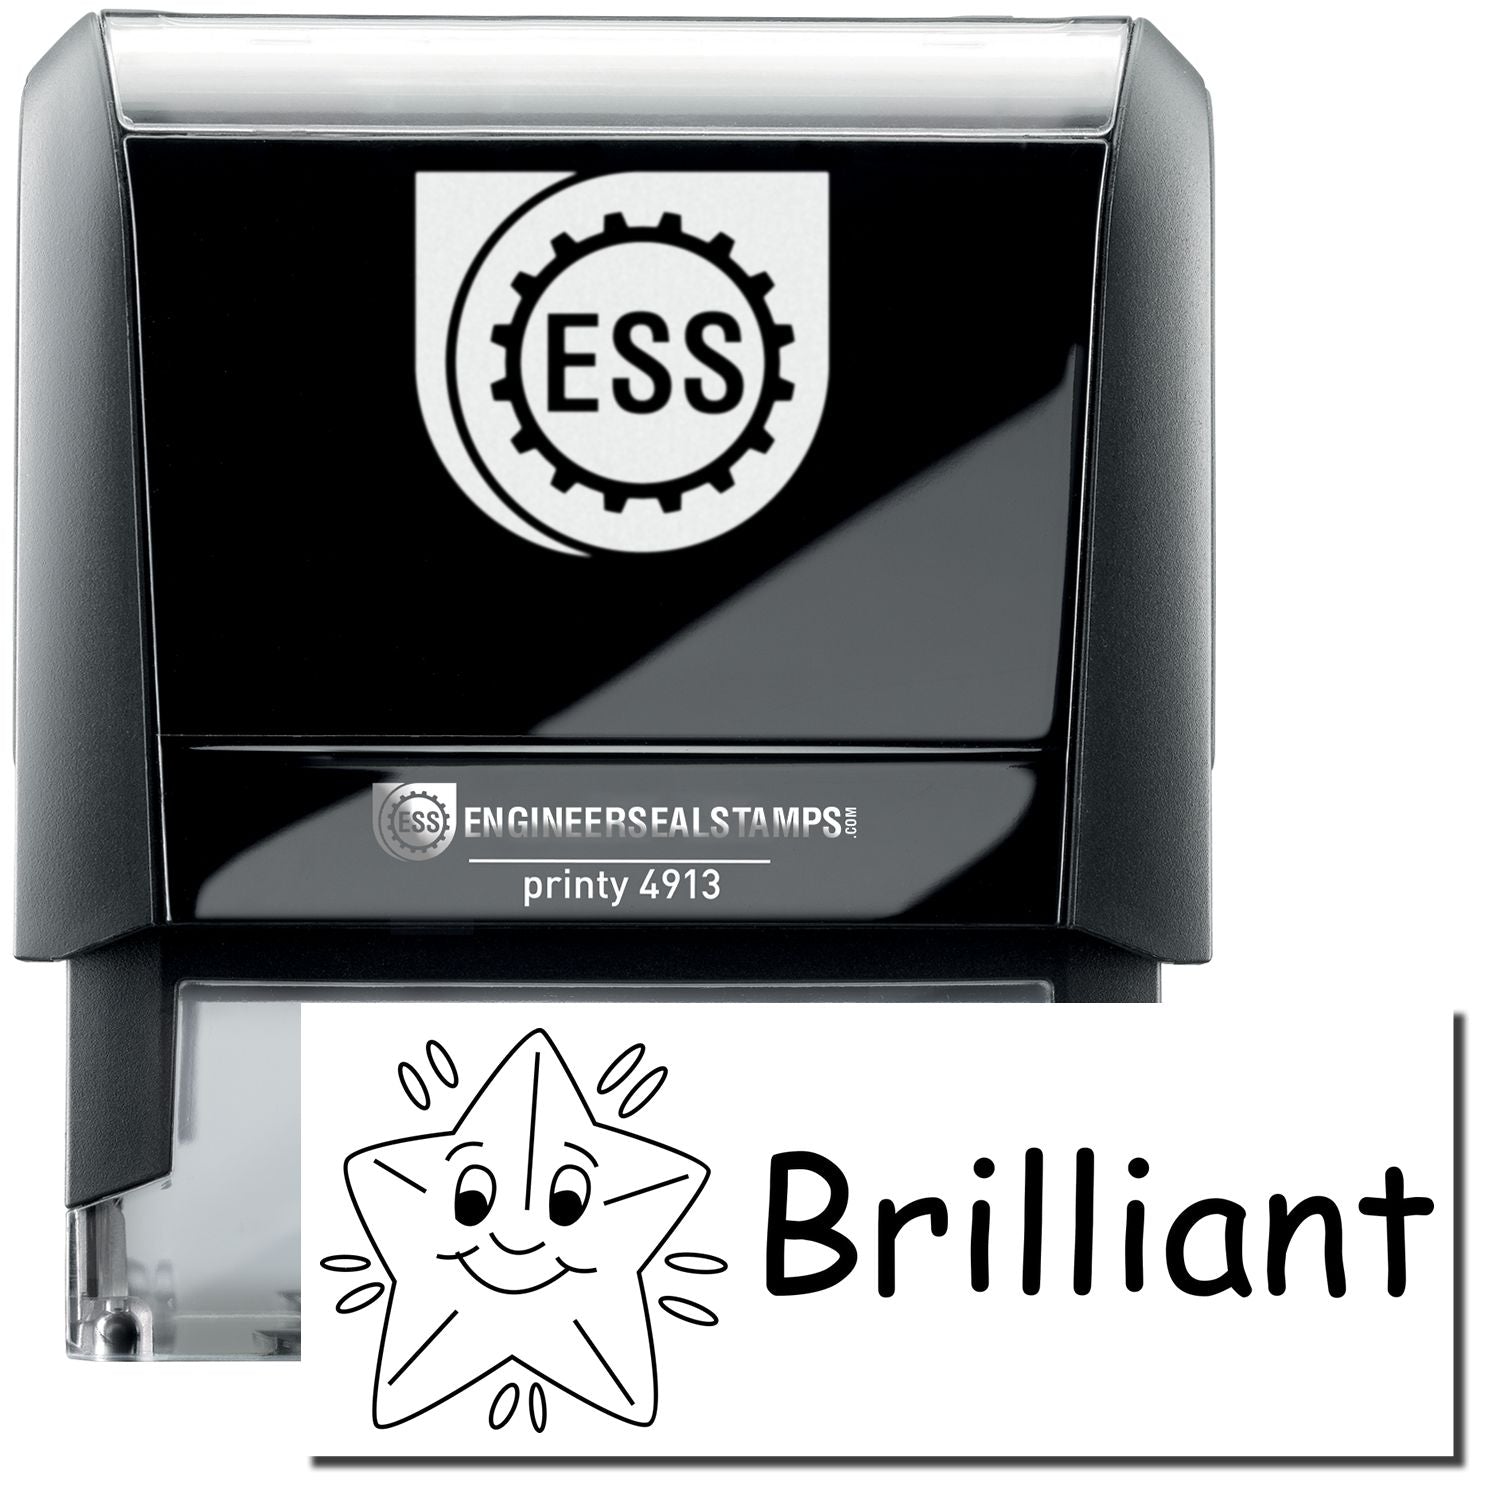 A self-inking stamp with a stamped image showing how the text "Brilliant" with a shining smiley star in a large font is displayed by it after stamping.